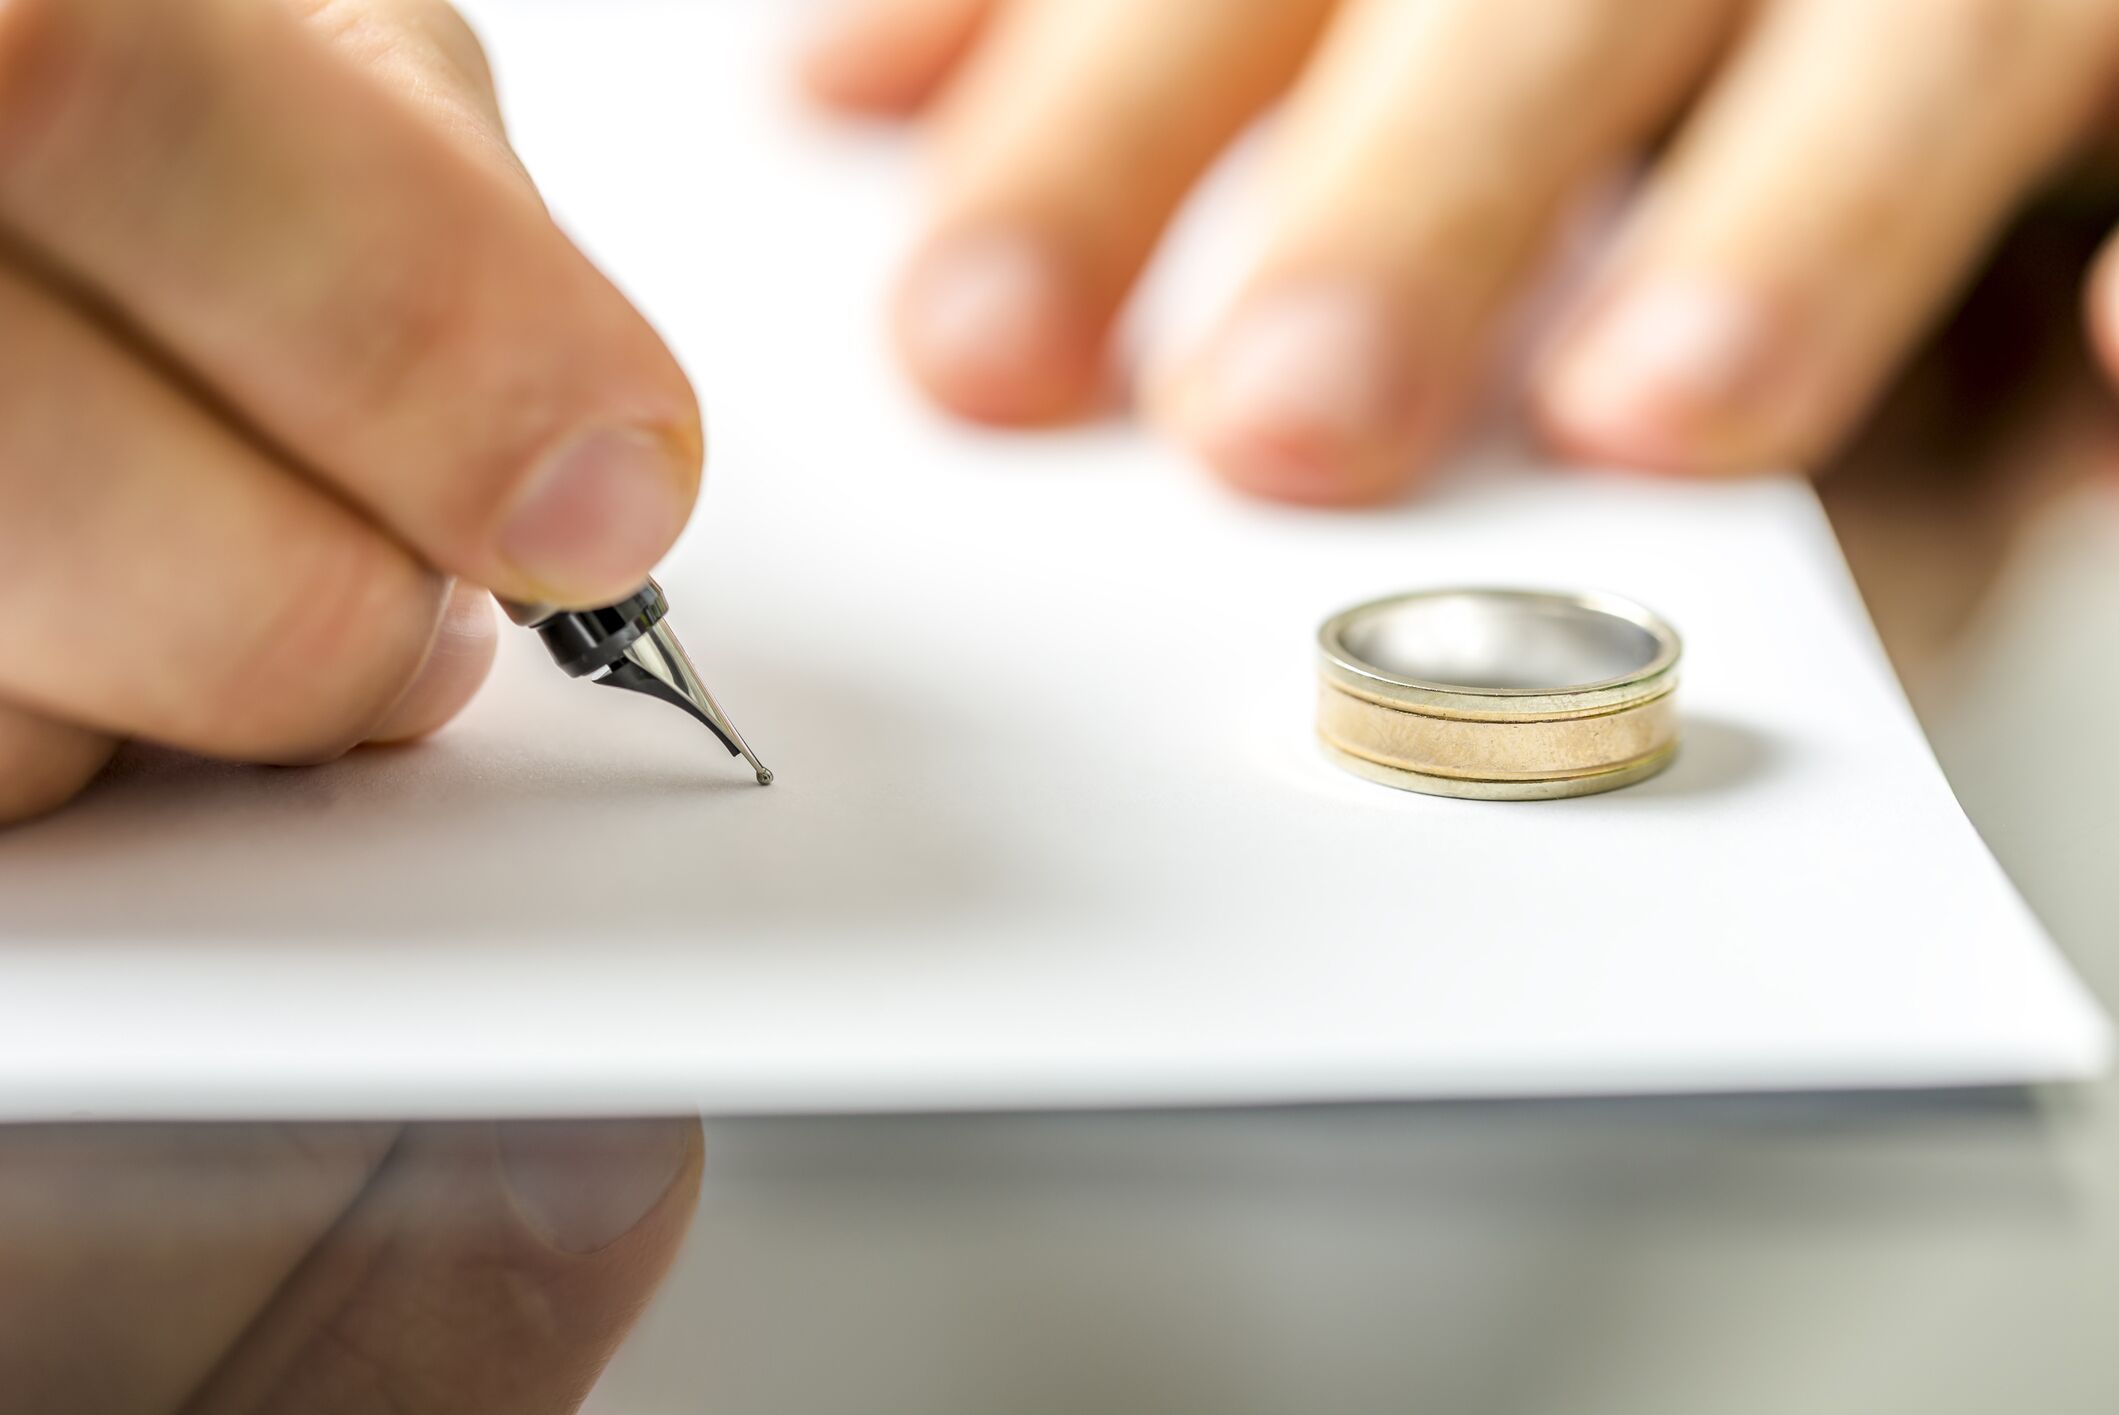 Man signing a divorce document next to wedding ring